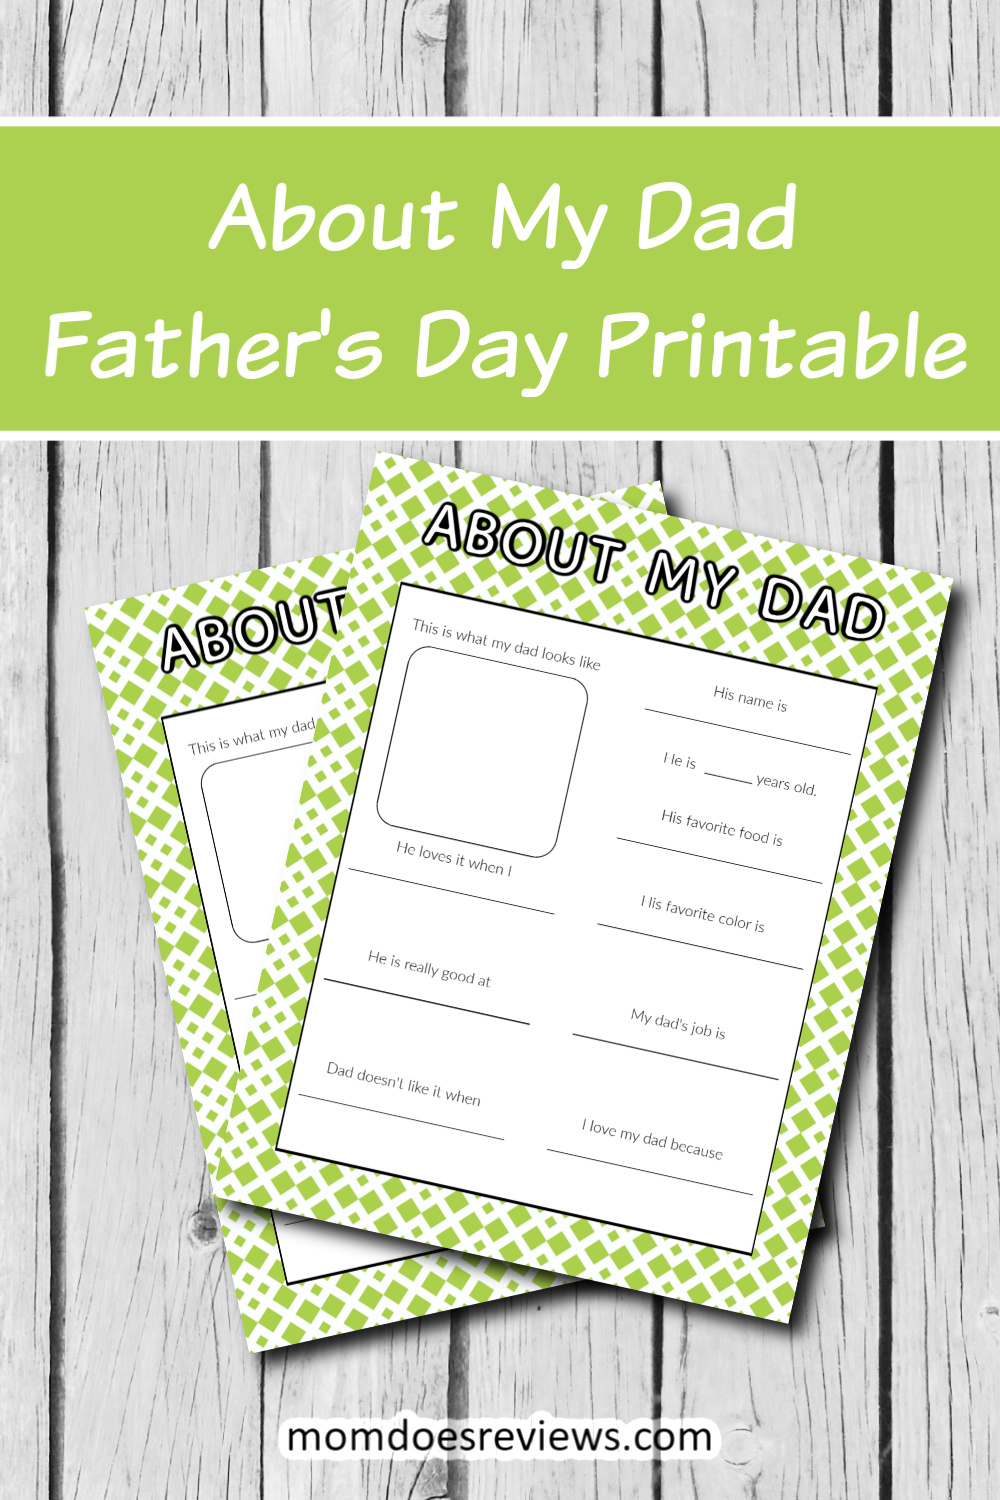 About My Dad- Fun Father's Day Printable